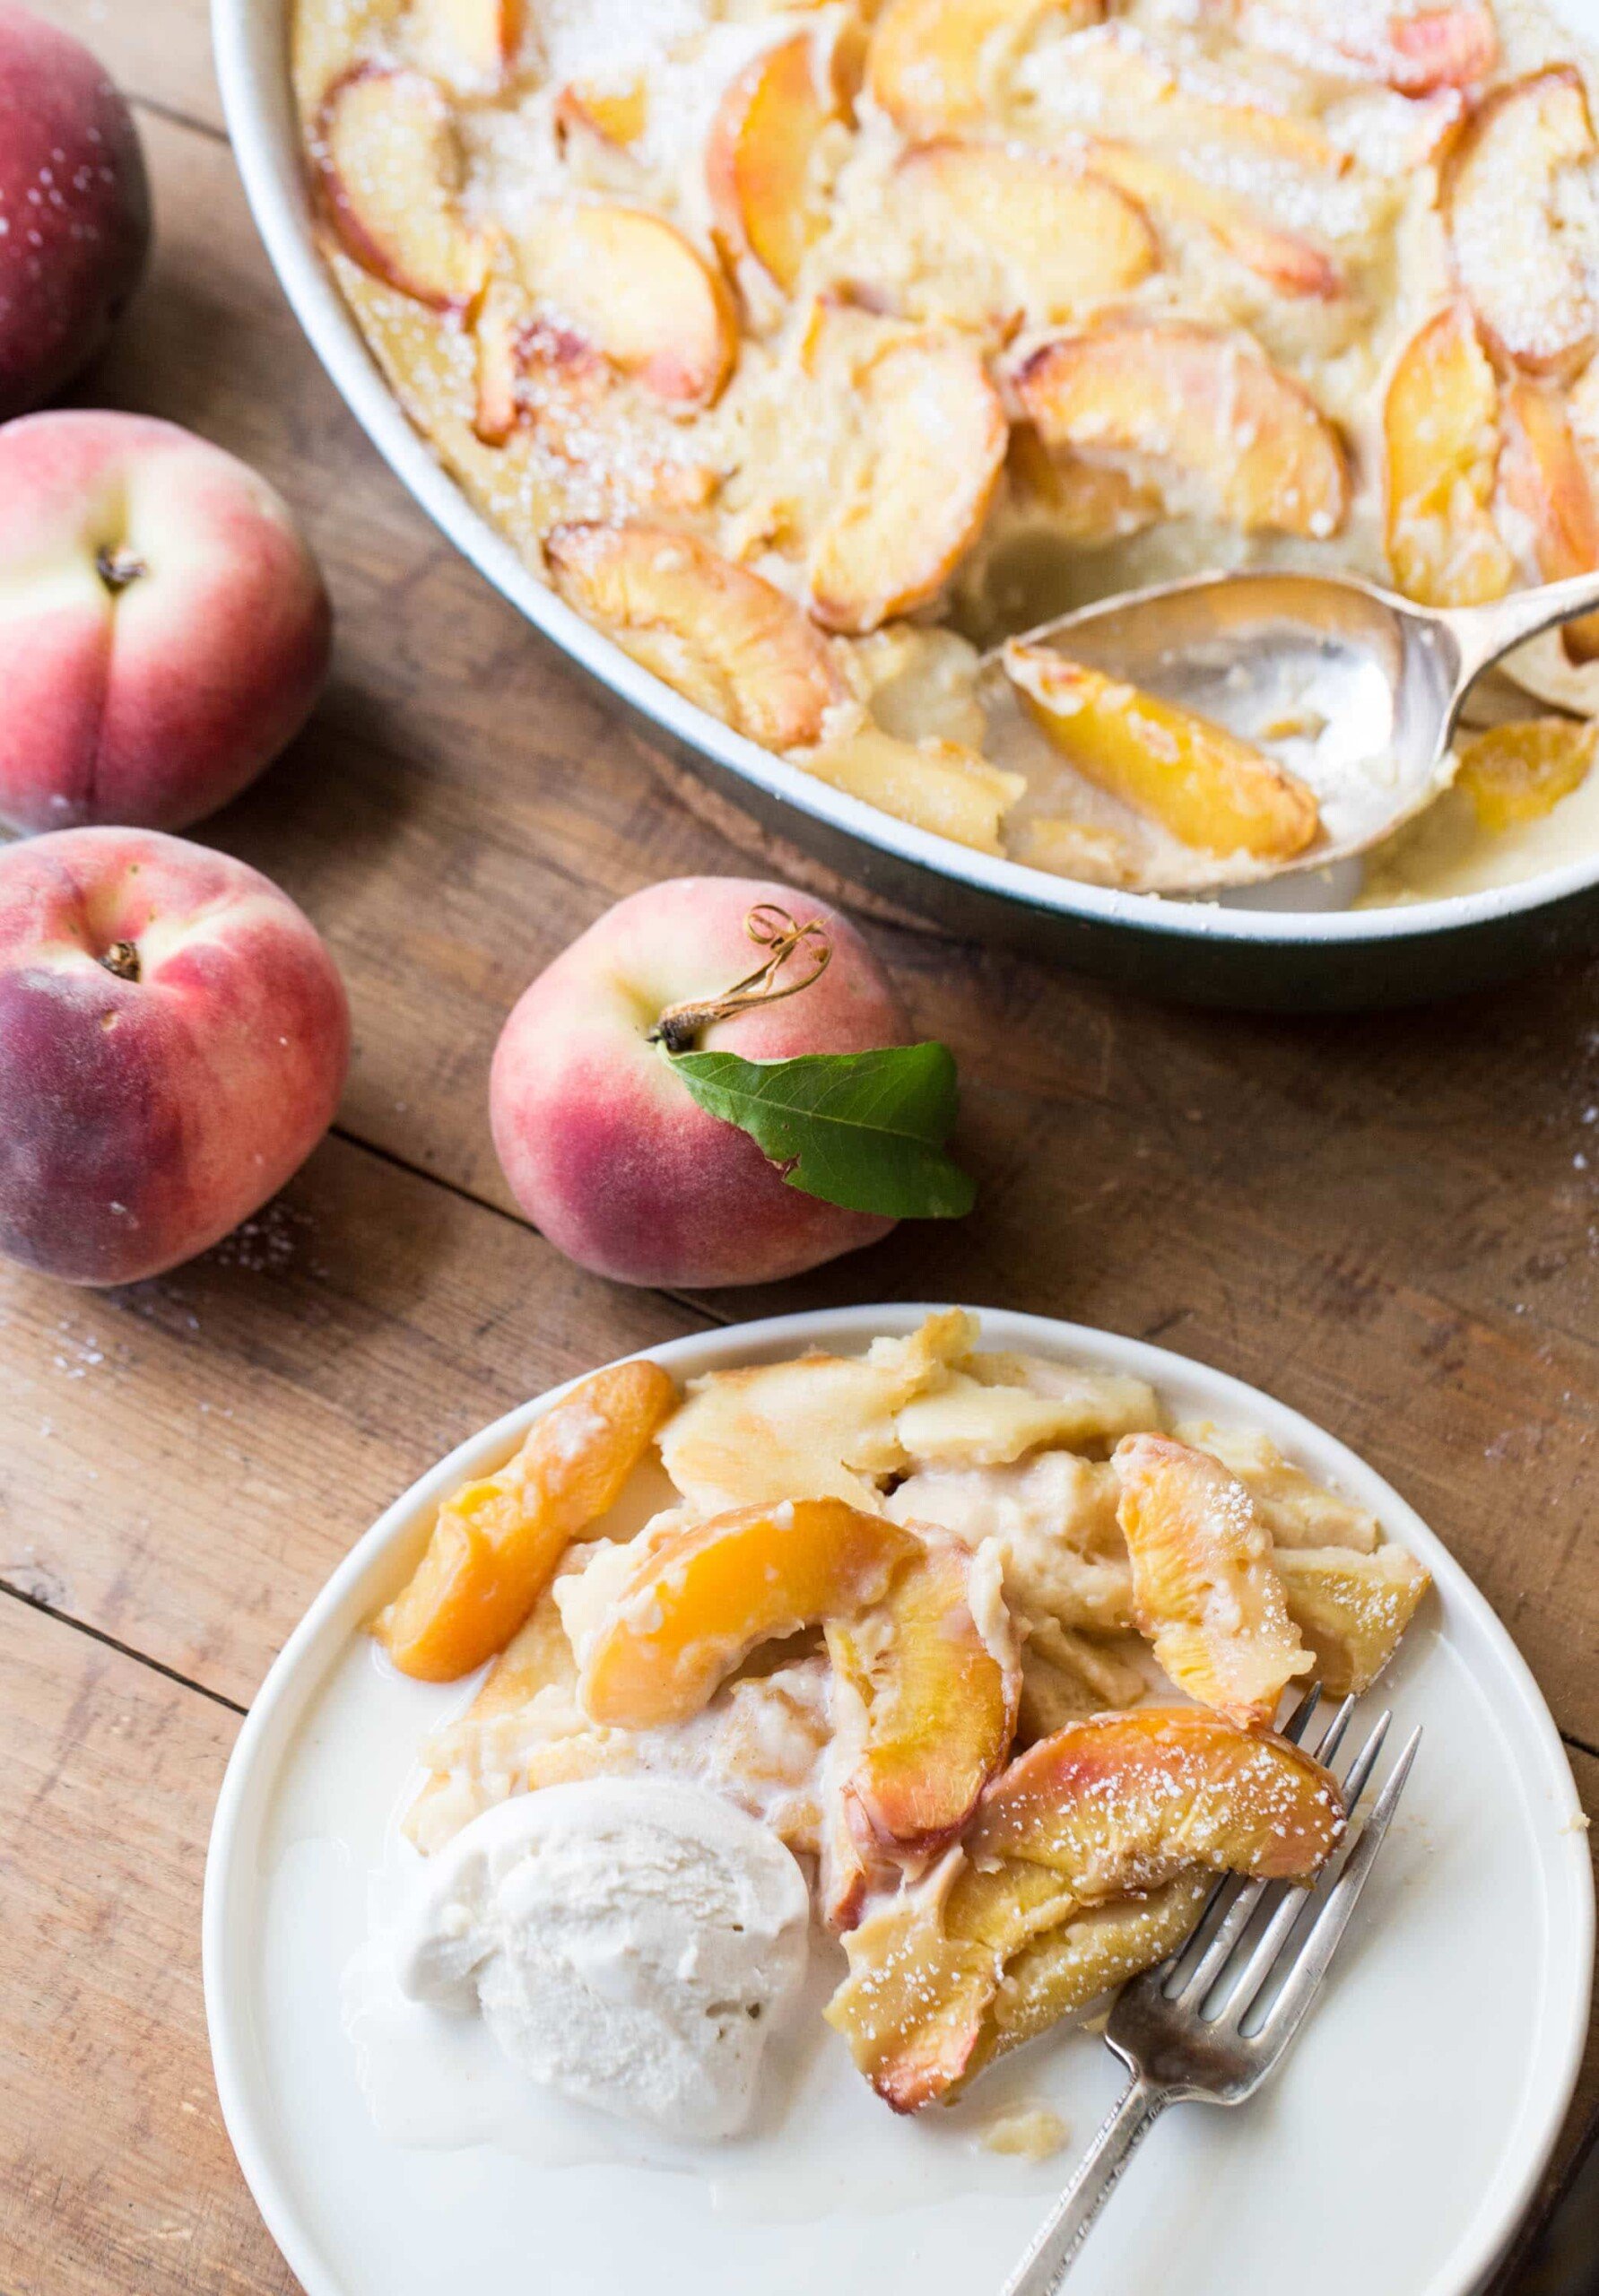 Ice cream and Peach Clafoutis on a plate with a fork.